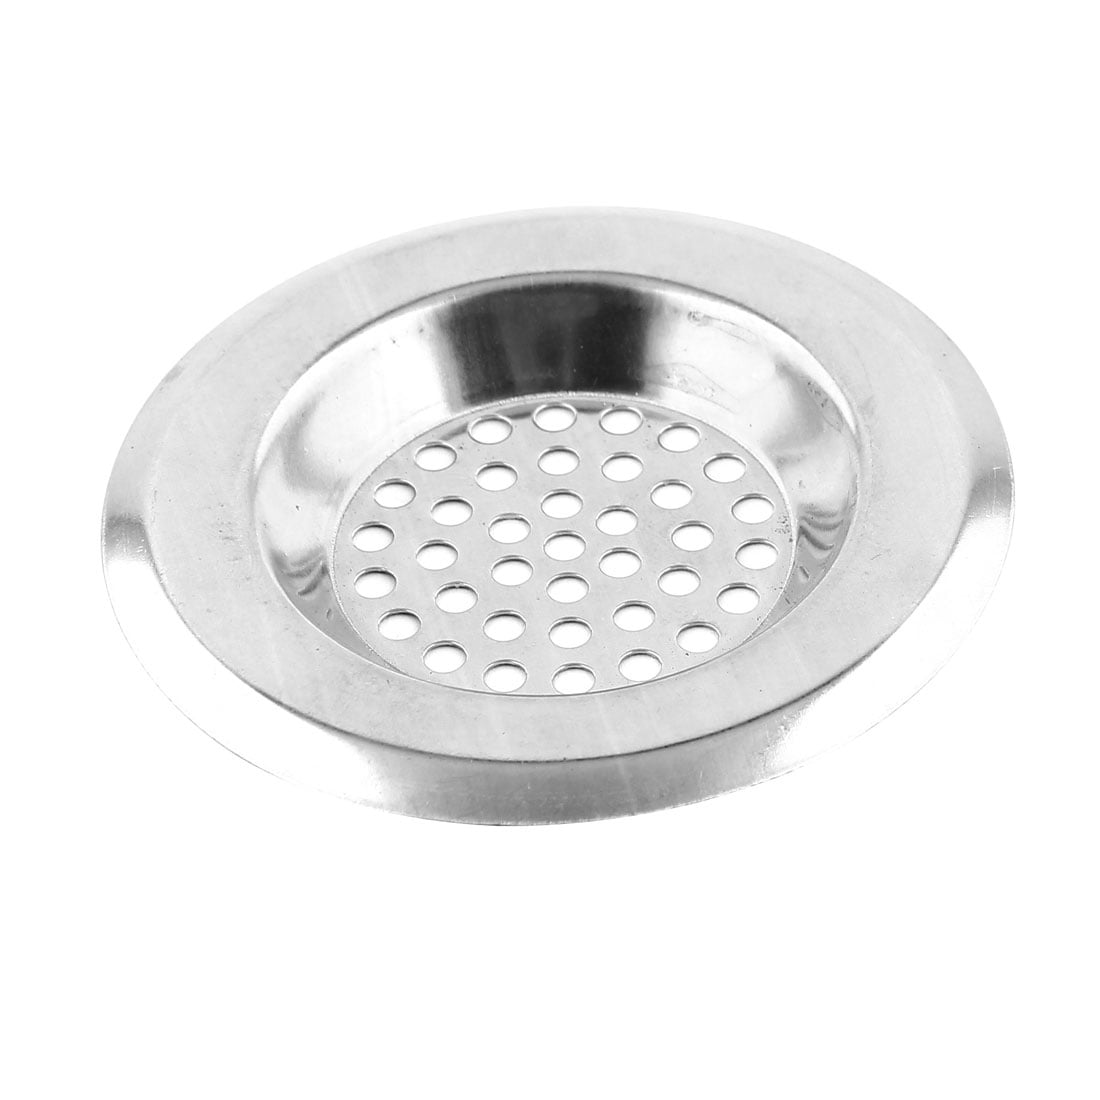 https://ak1.ostkcdn.com/images/products/is/images/direct/0eb5a1513978a31d1fbc220d3ee1badc027dadd5/Unique-BargainsBathroom-Round-Metal-Sink-Basin-Garbage-Strainer-Stopper-3.4cm-Internal-Dia.jpg